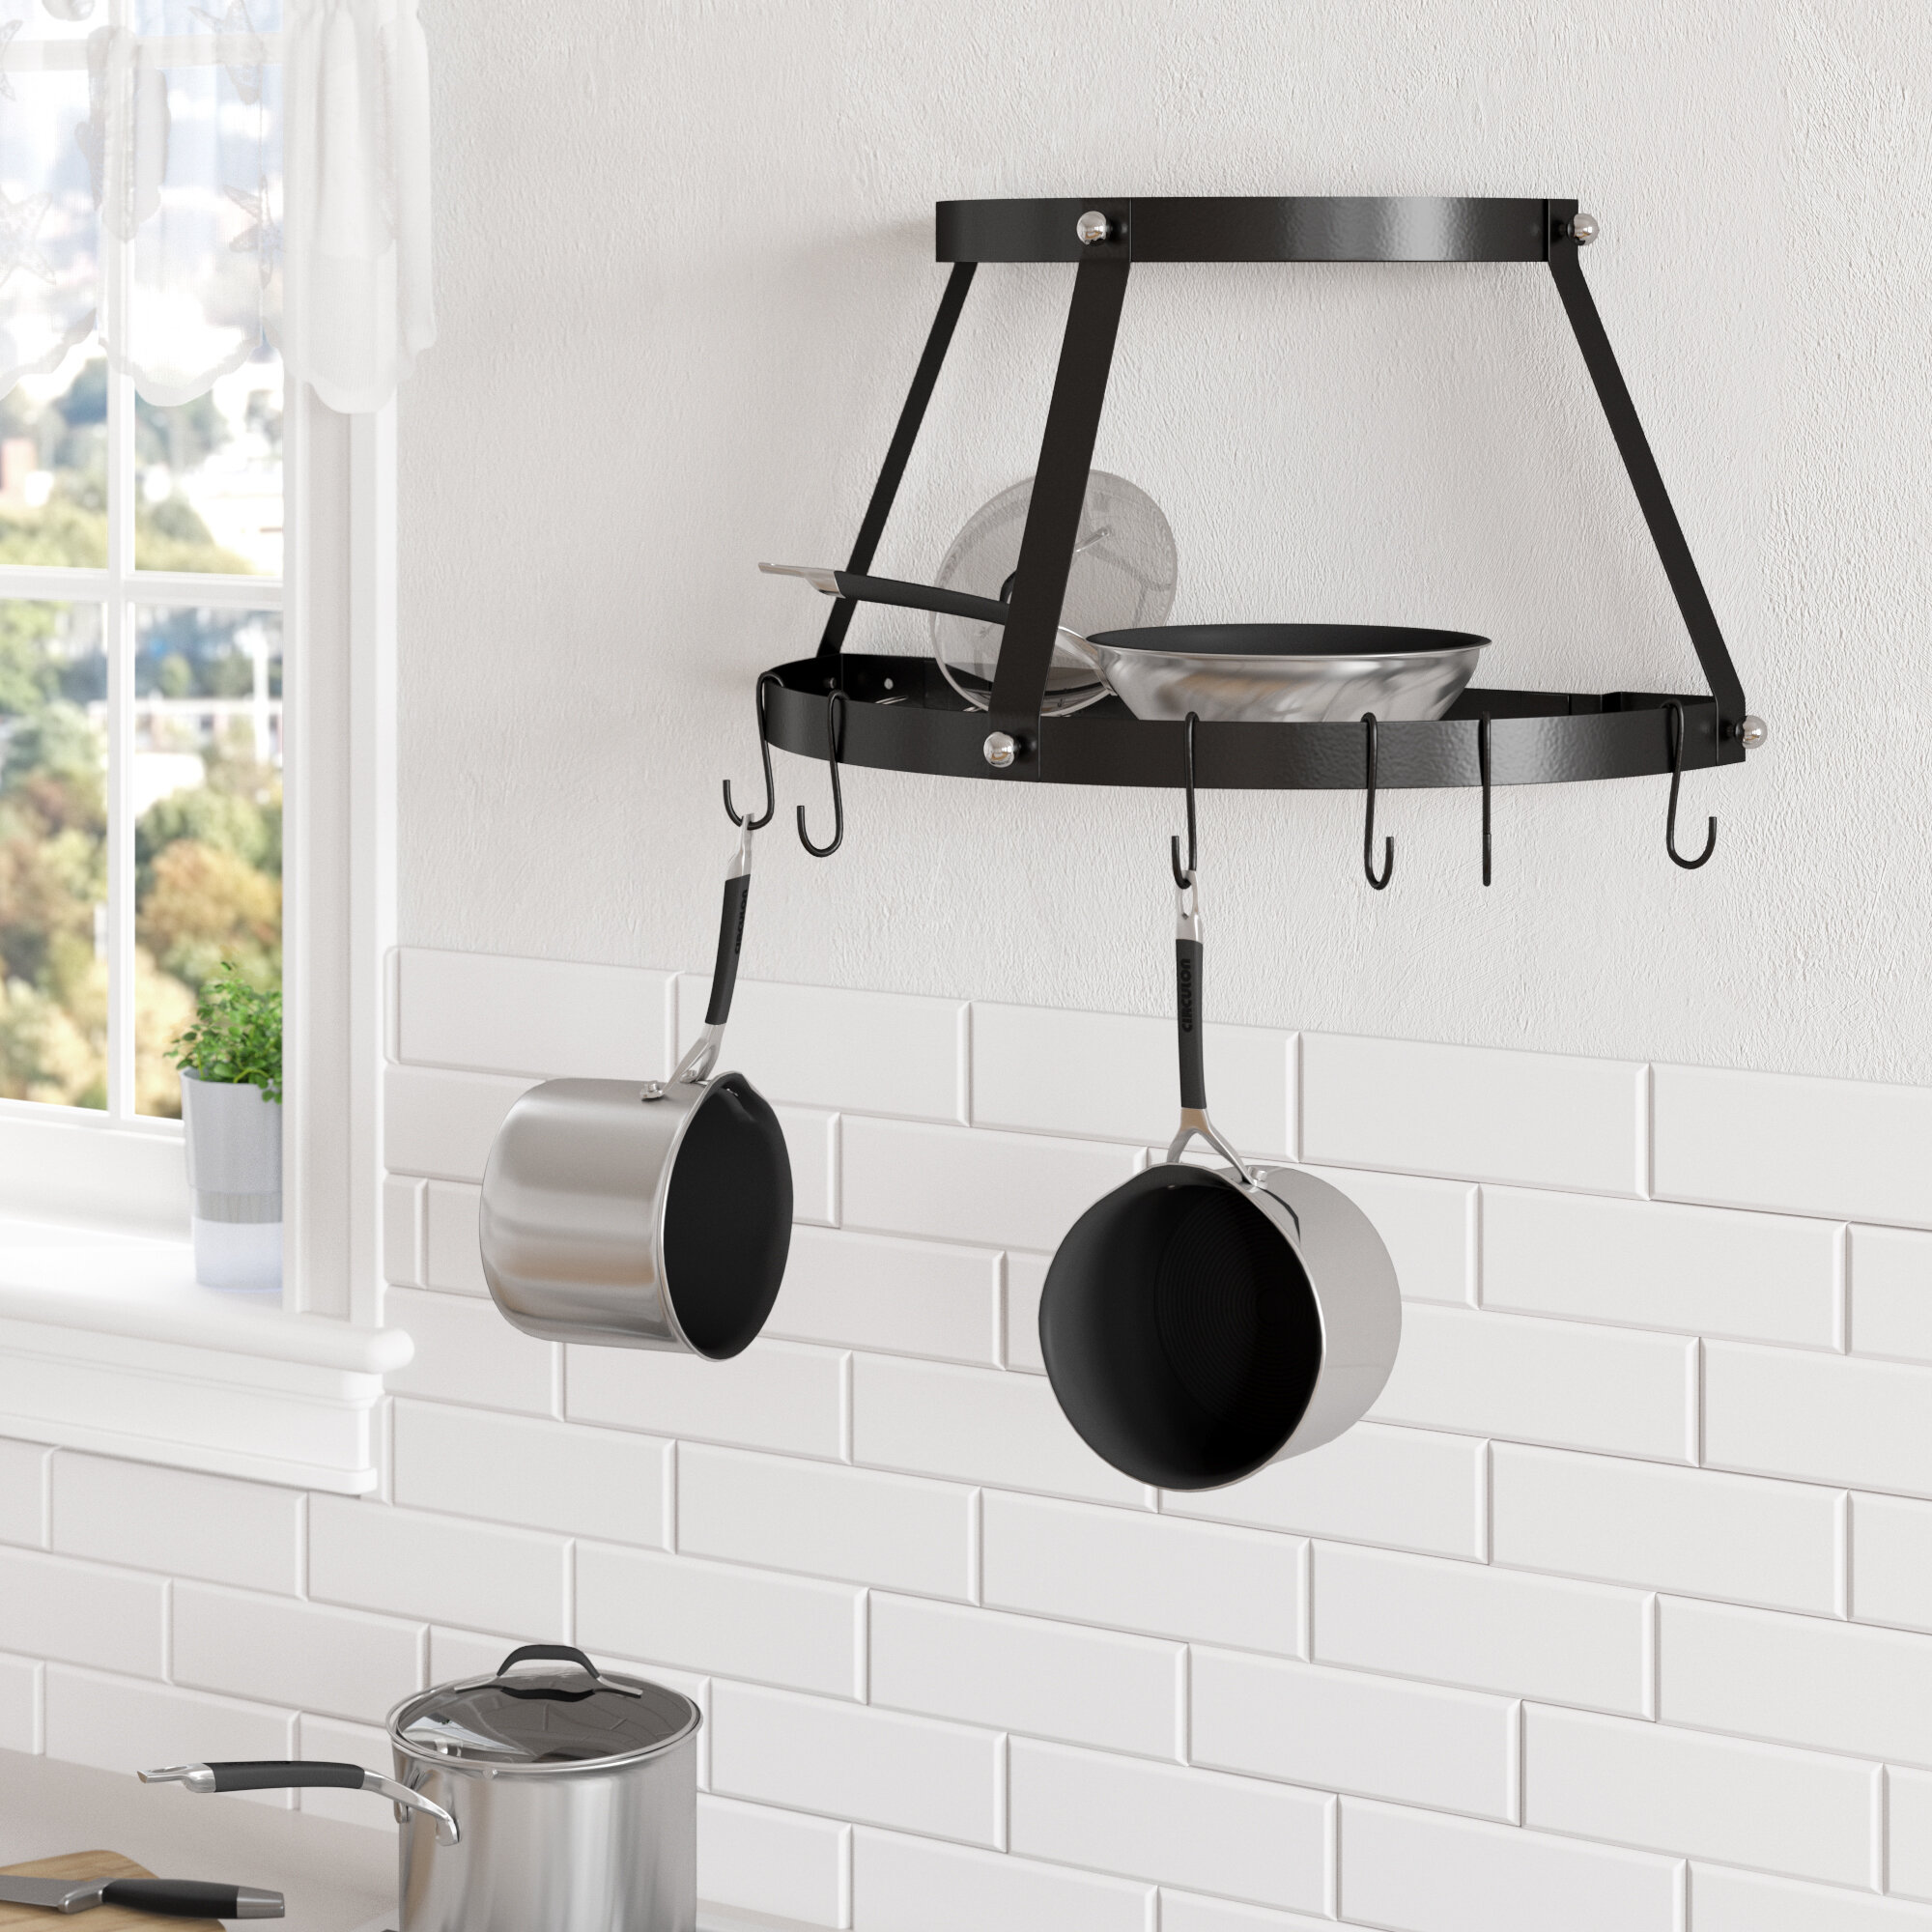 Wall Mount Pot Rack, Low Profile for Cast Iron